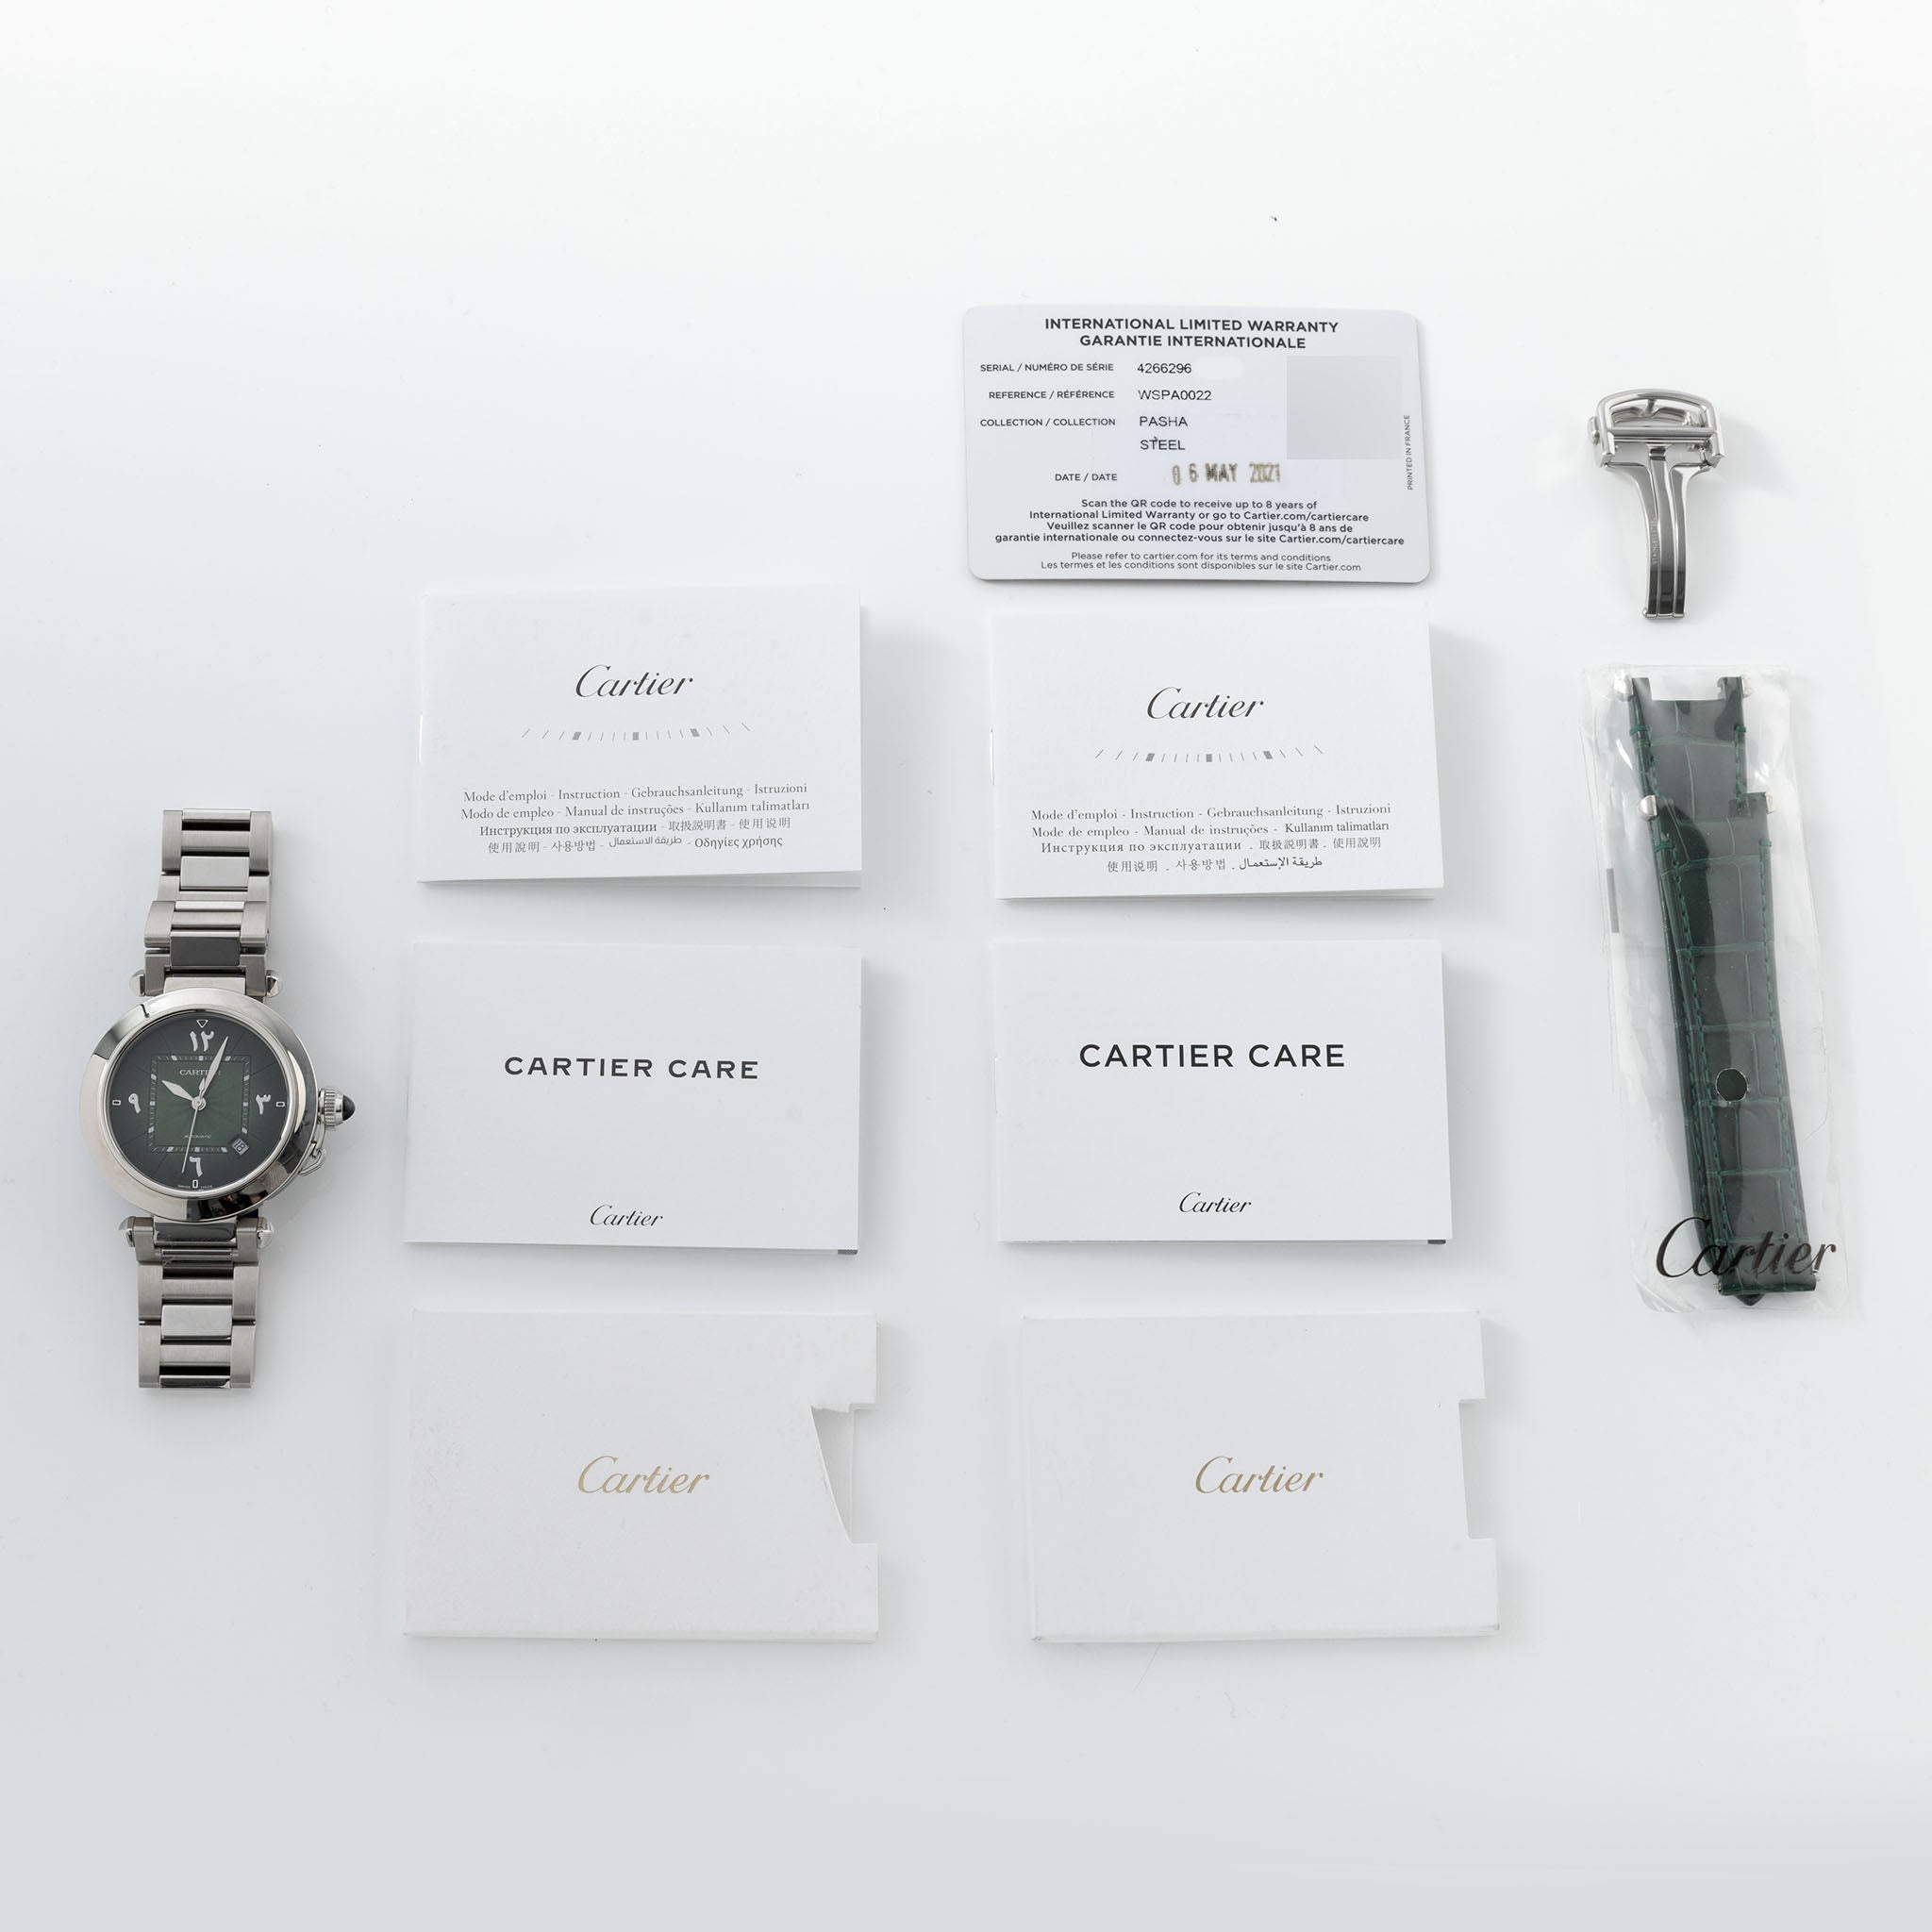 Cartier Pasha Green Middle East limited Edition with Warranty Card